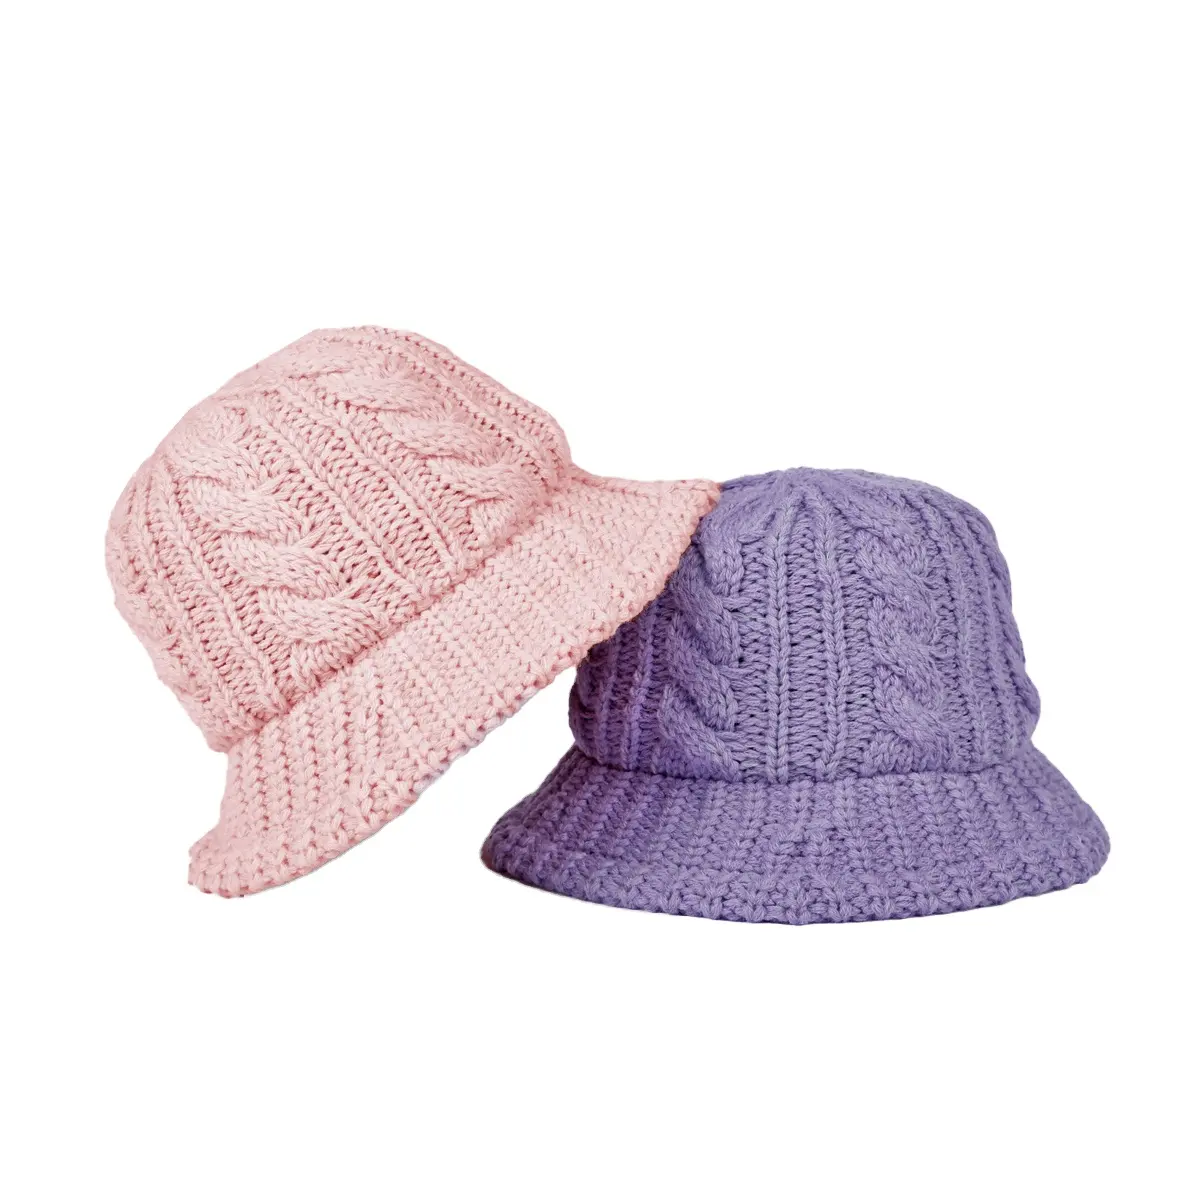 New fashion vacation colorful knit crochet bucket hat 100%acrylic cable knitted bucket hat